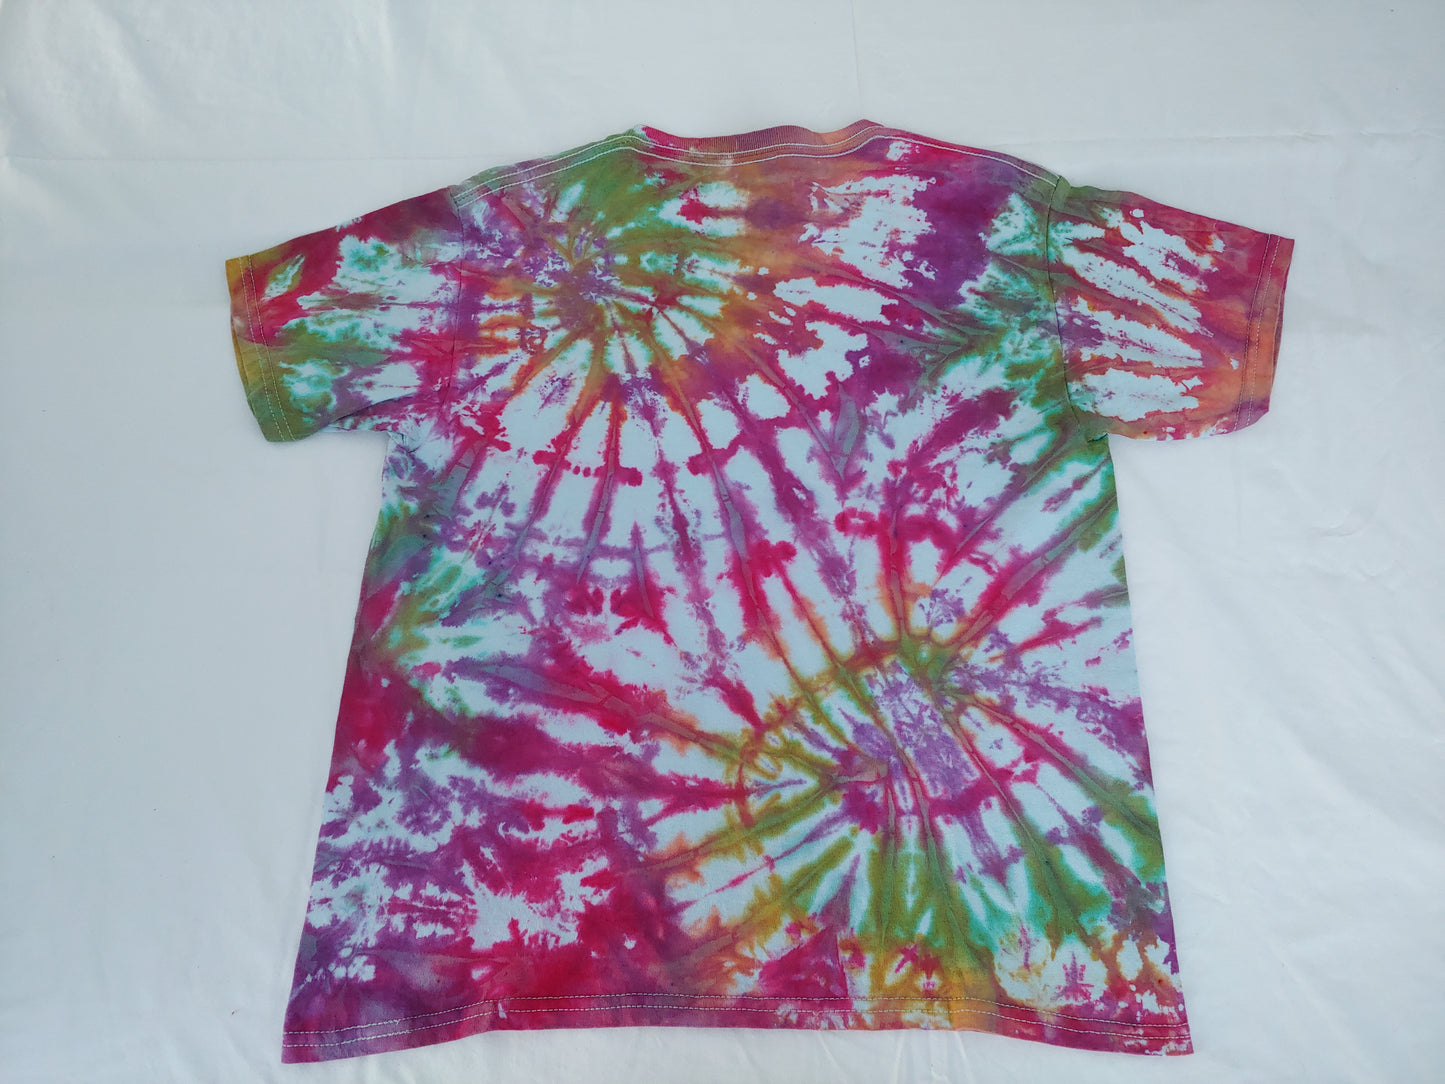 YOUTH LARGE TIE DYE 25